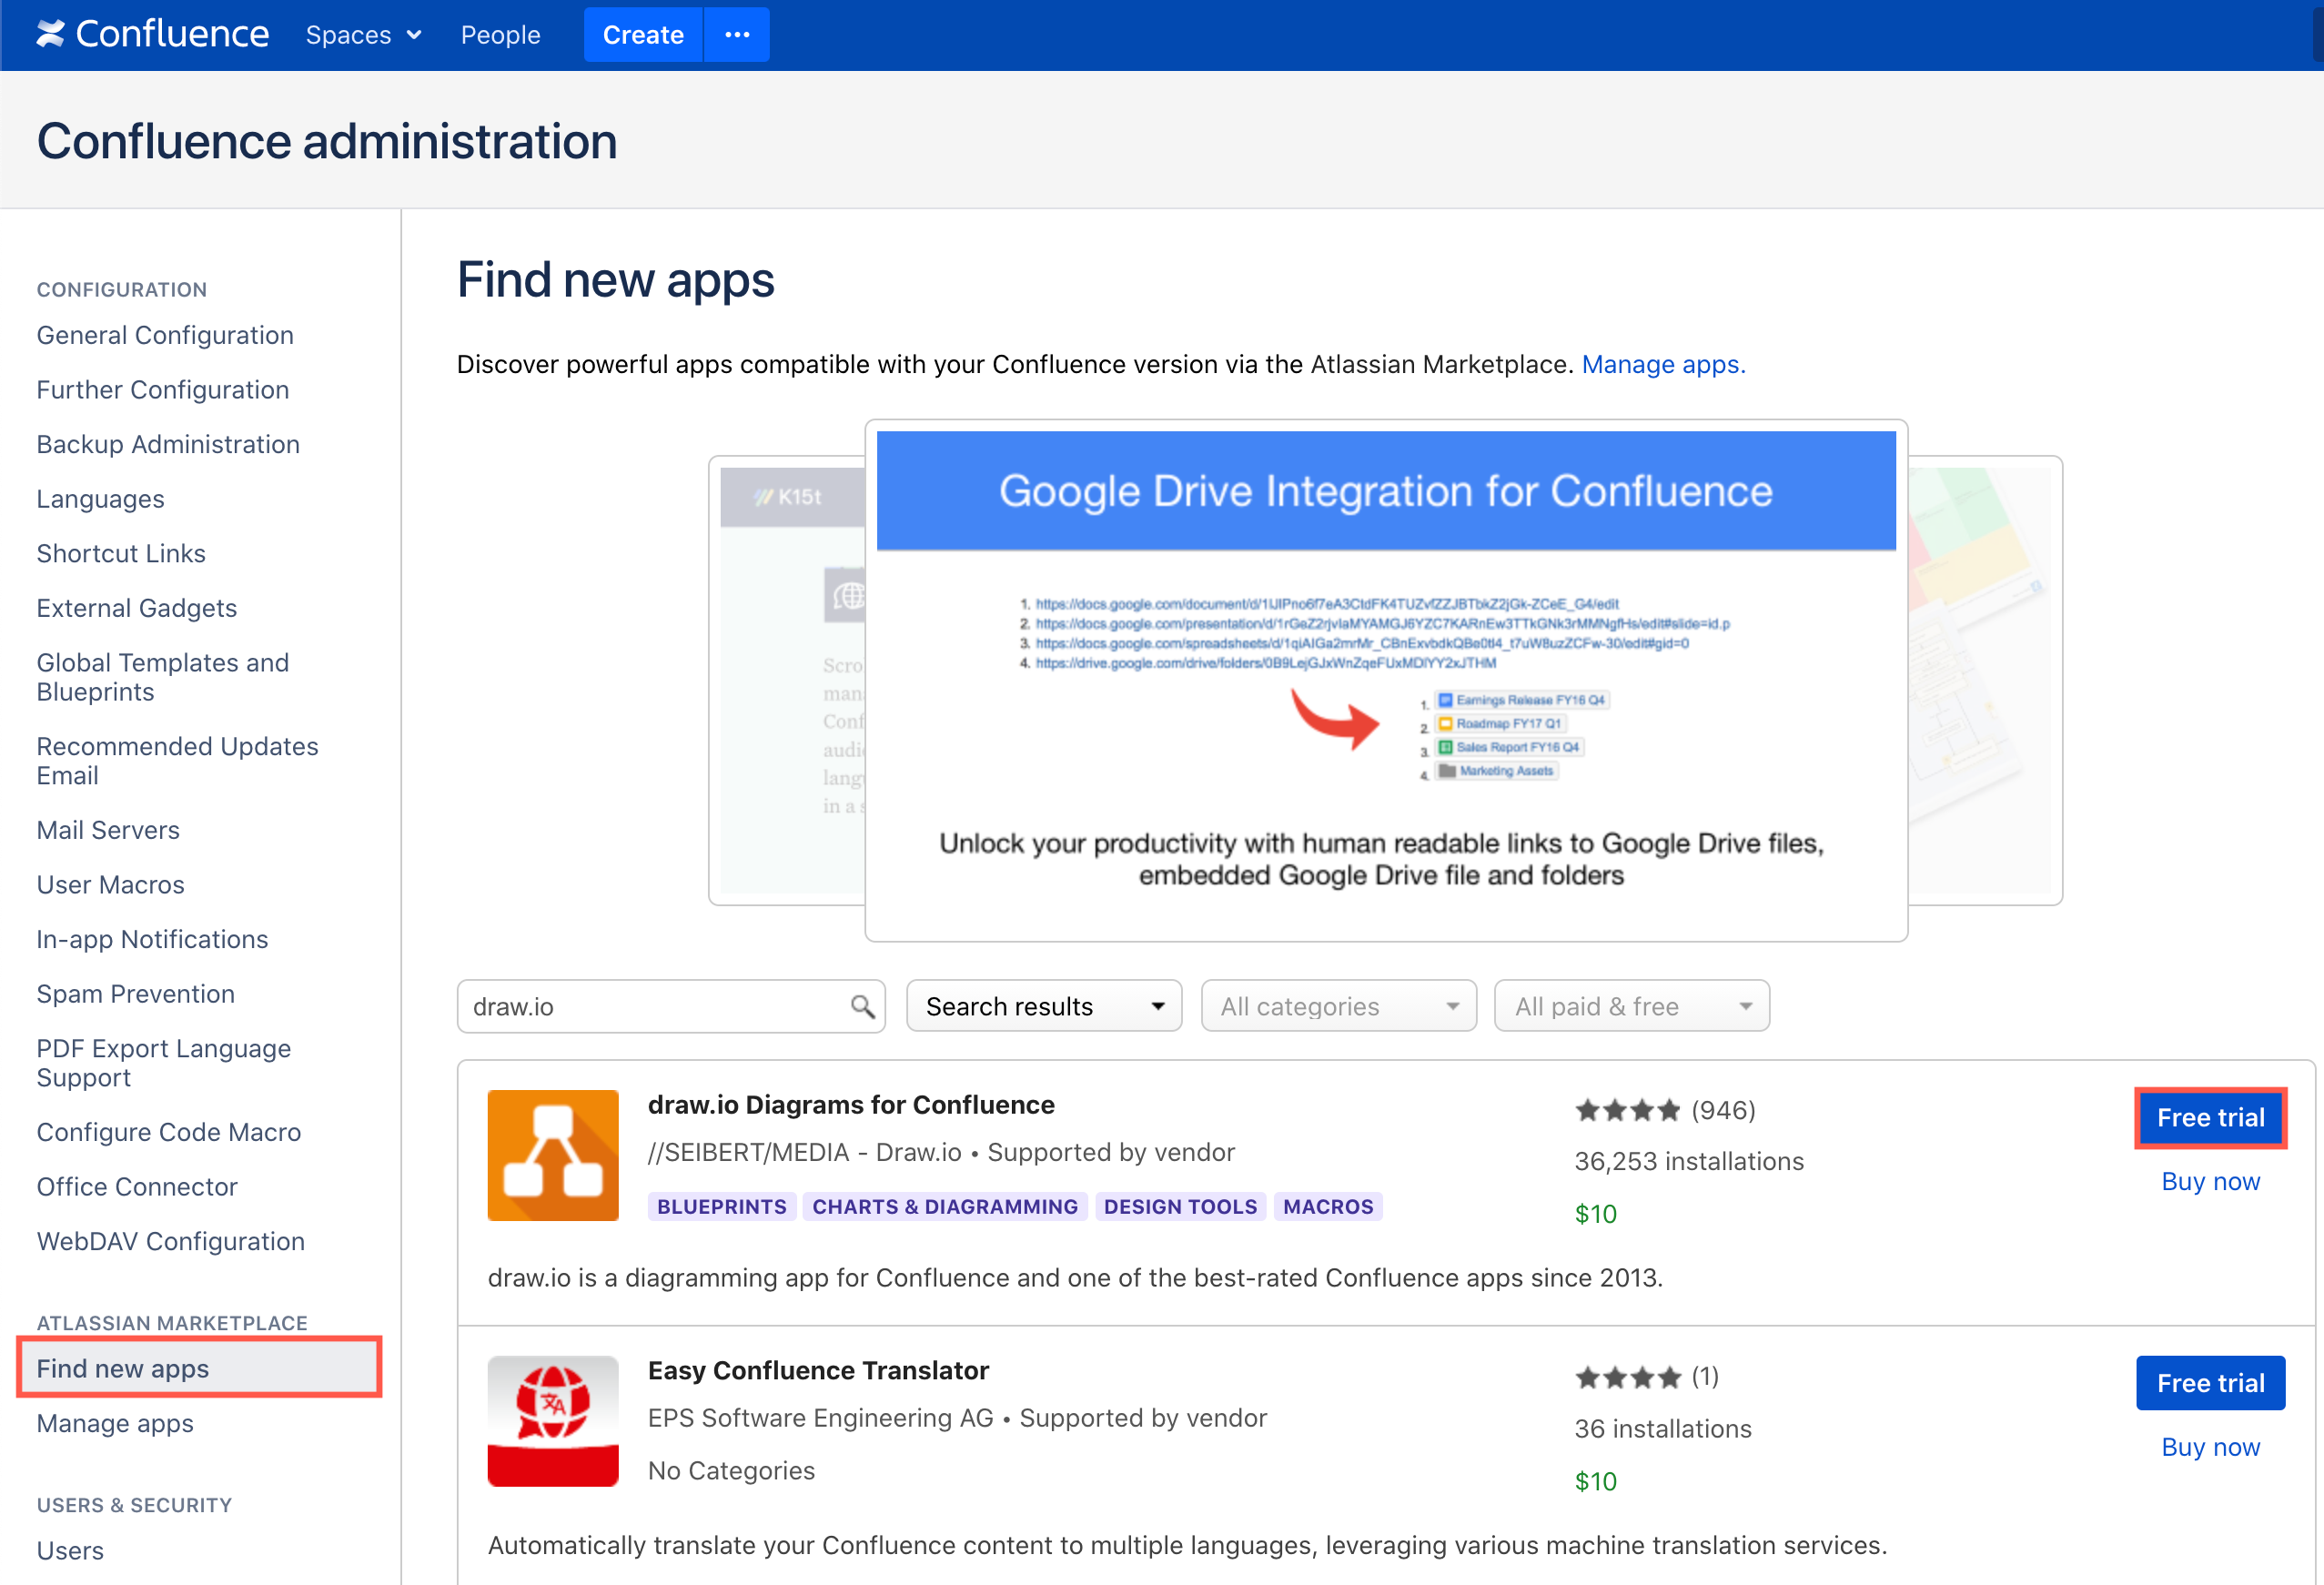 Get a trial draw.io license in Confluence Server